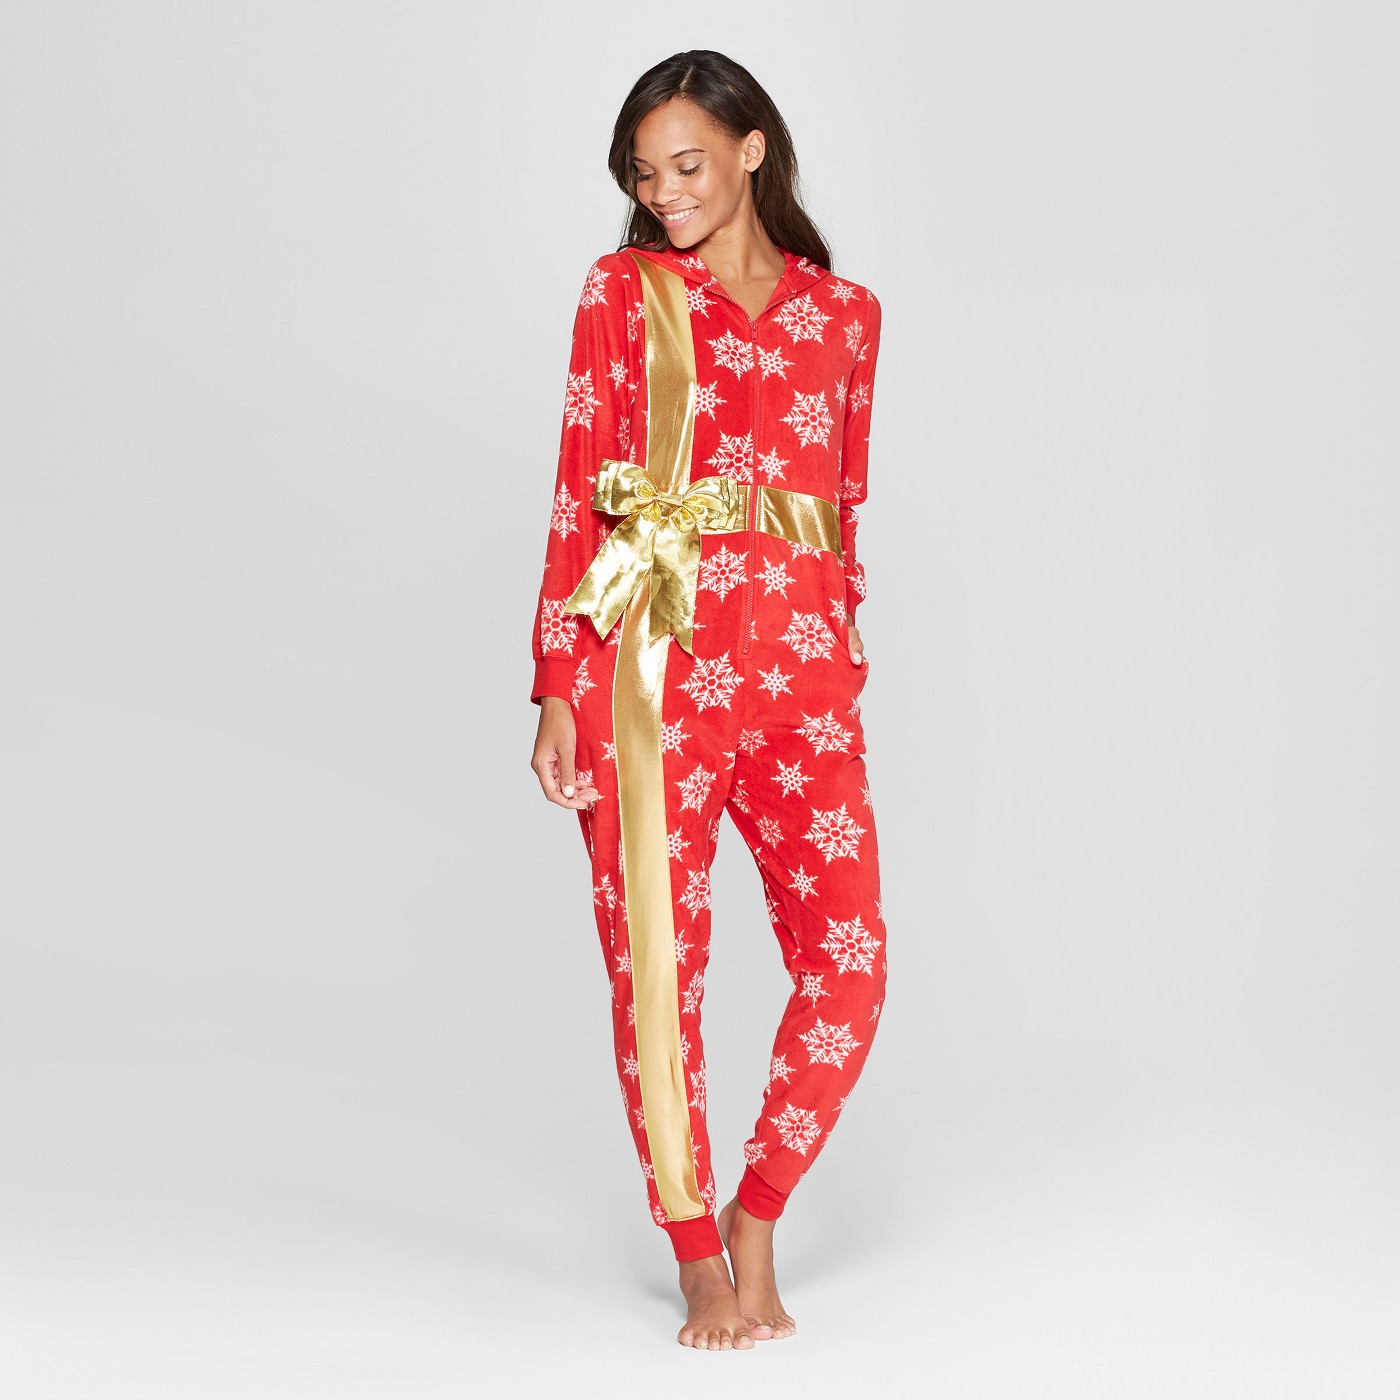 Target Cartwheel Offer Save 25 On Womens Character Onesie